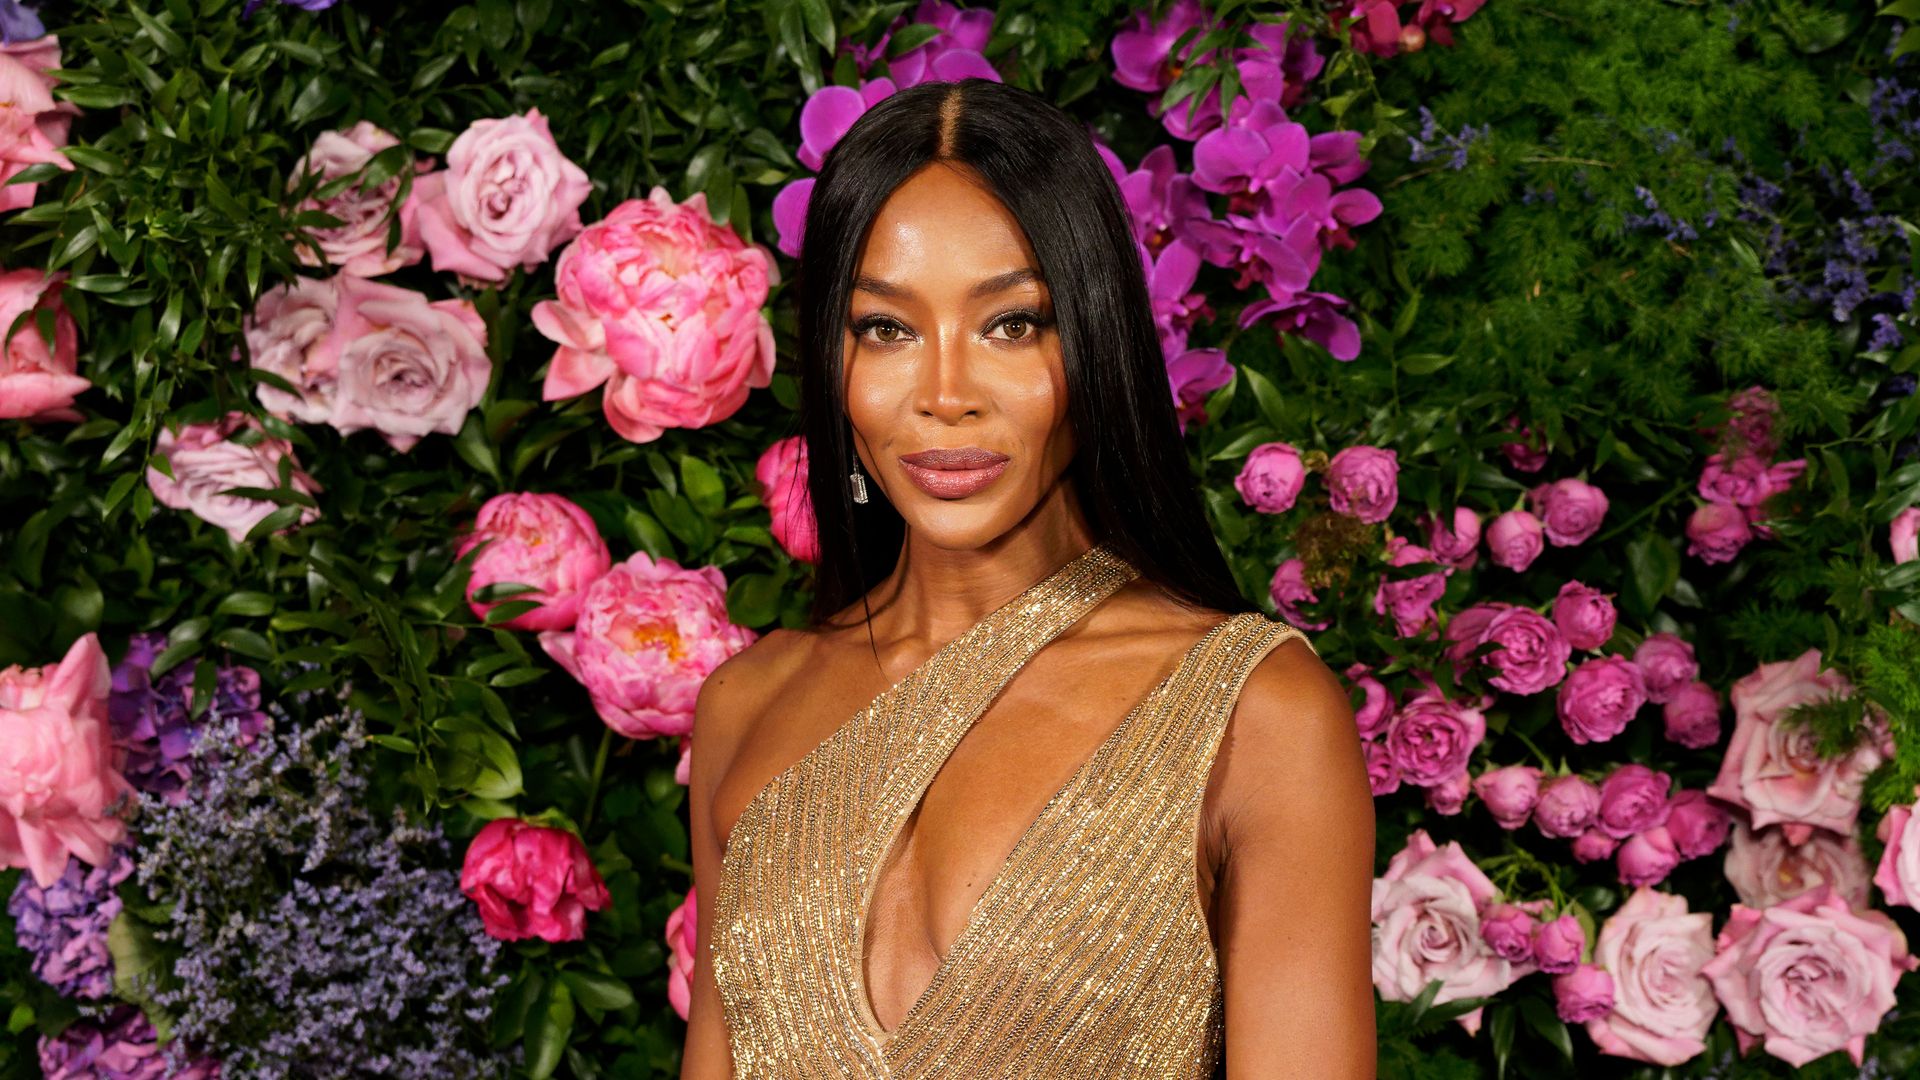 Naomi Campbell attends "BOSS X NAOMI - Naomi Campbell's Birthday Party" hosted by Daniel Grieder during the 76th annual Cannes film festival at Villa Julia on May 22, 2023 in Cannes, France. (Photo by Sylvain Lefevre/Getty Images)